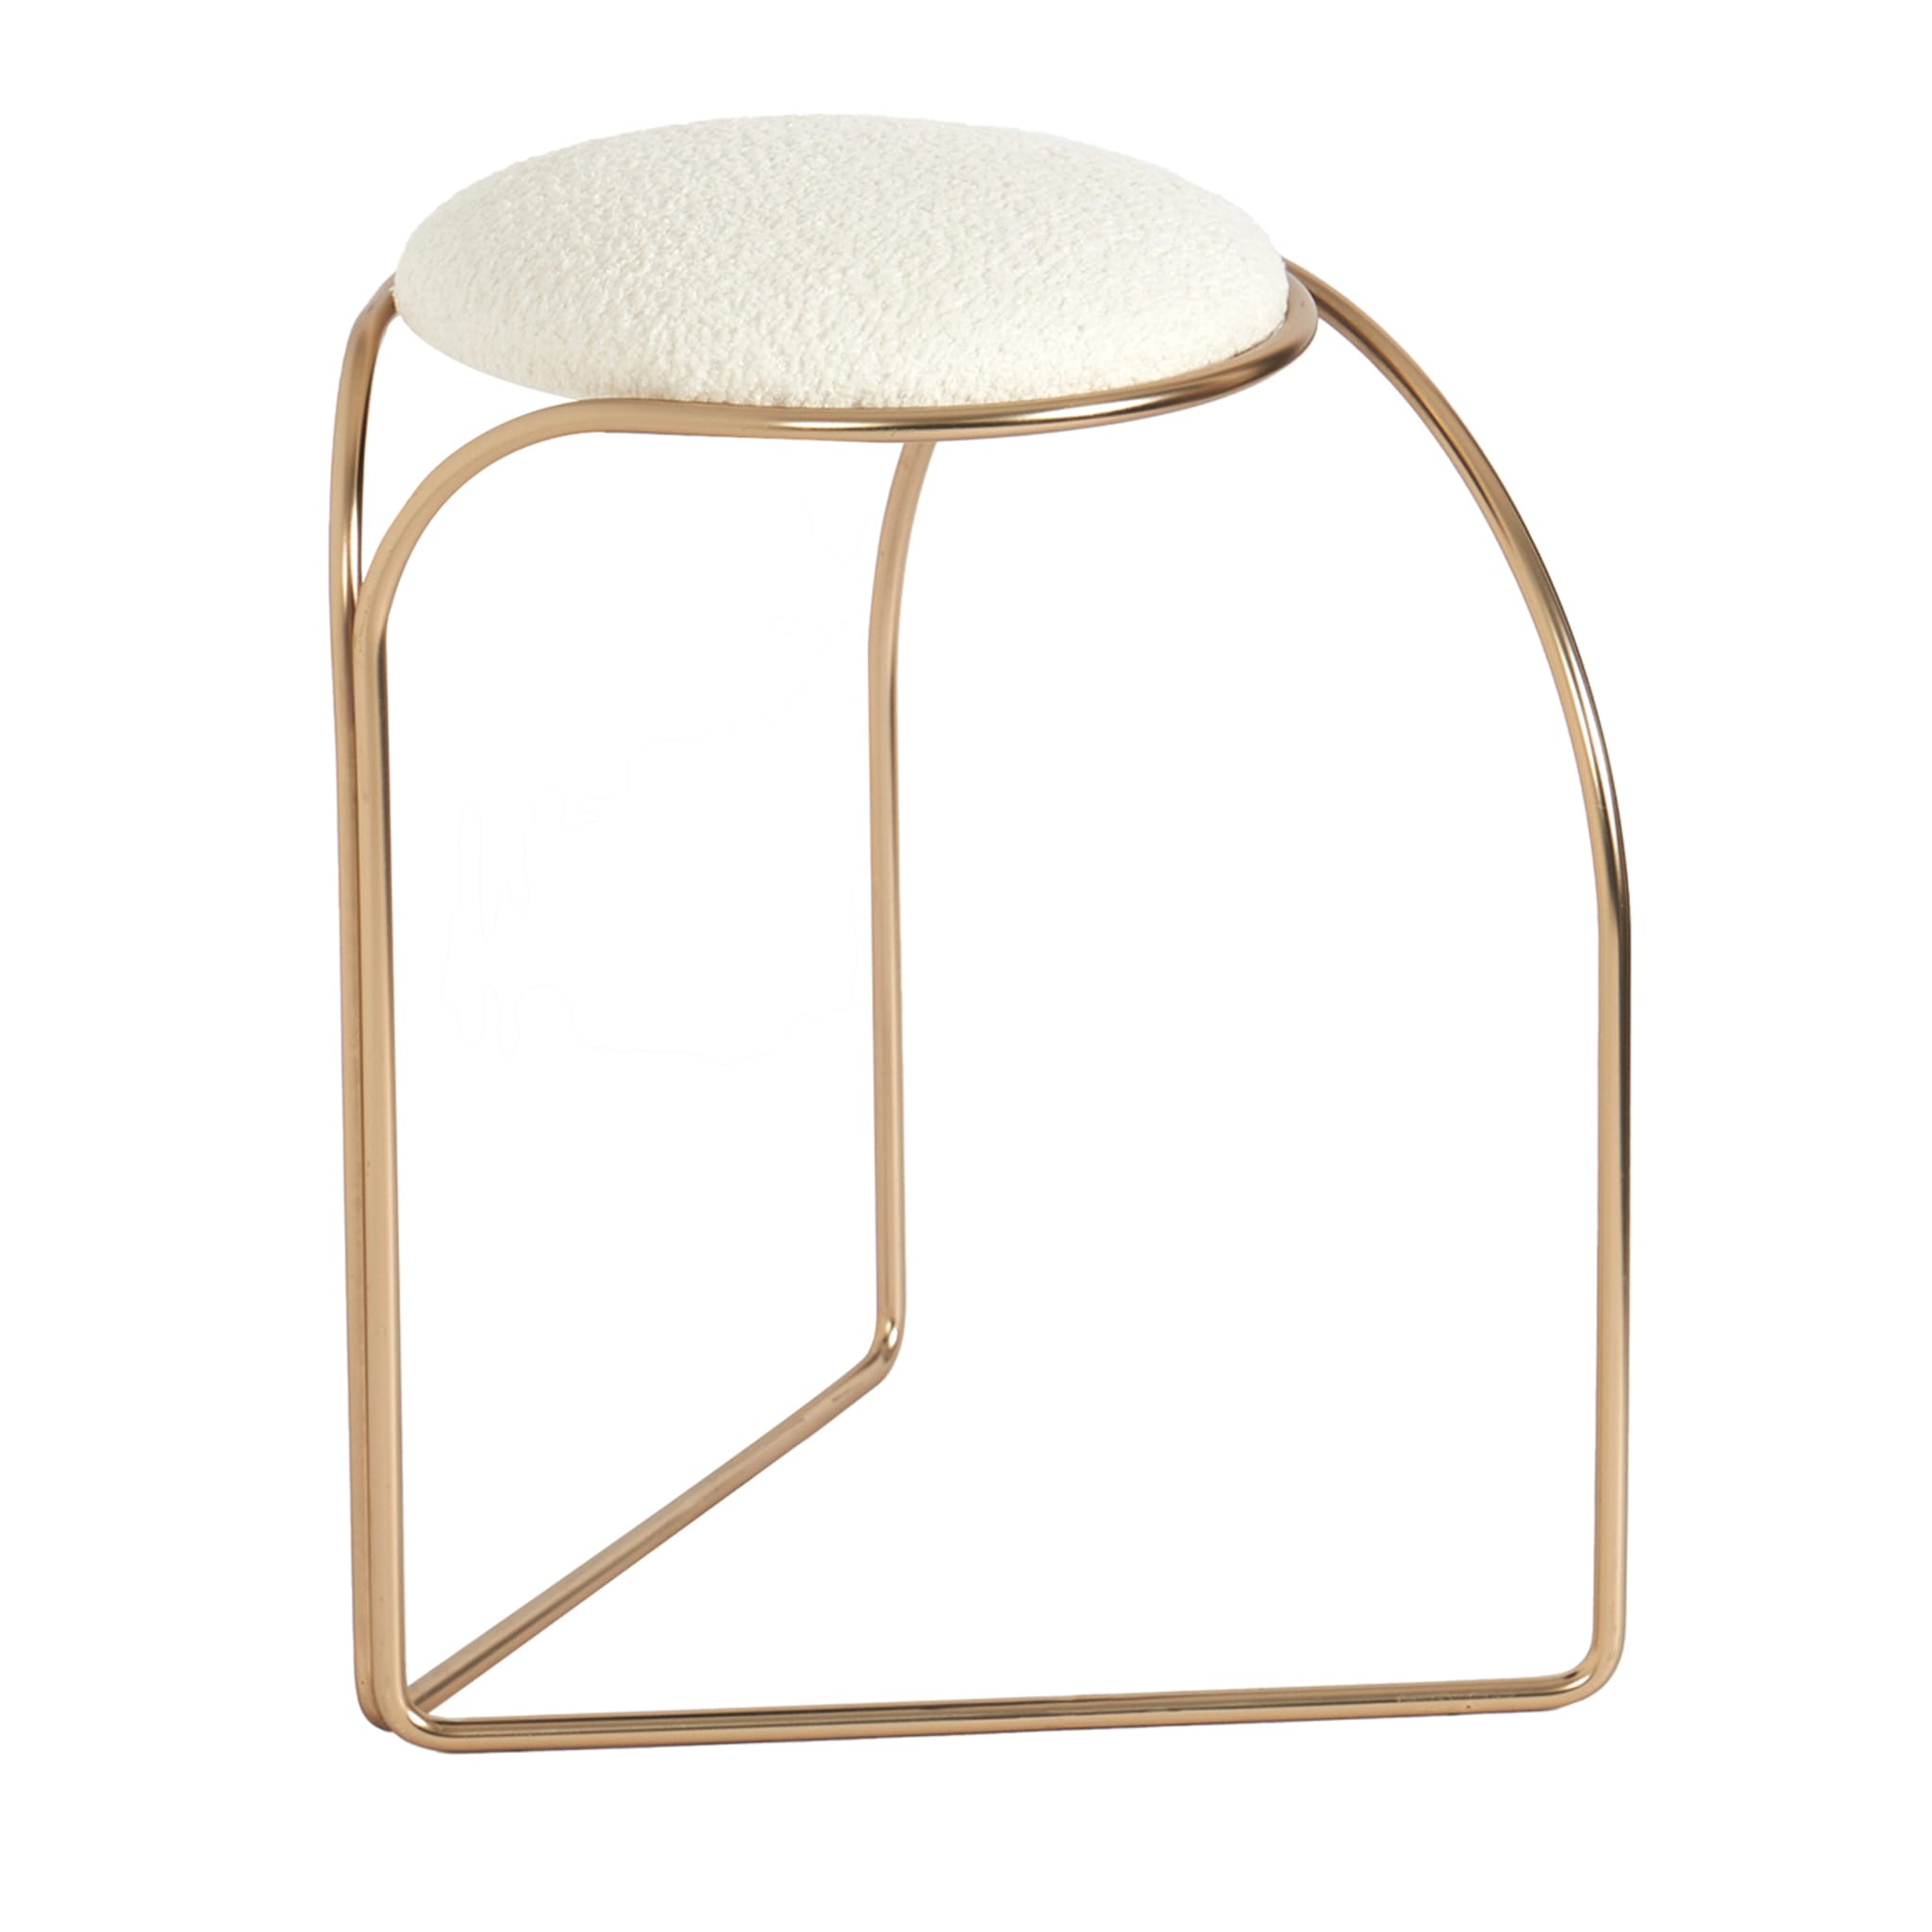 FLOW SCULPTURAL GOLD AND WHITE LOW STOOL - Main view